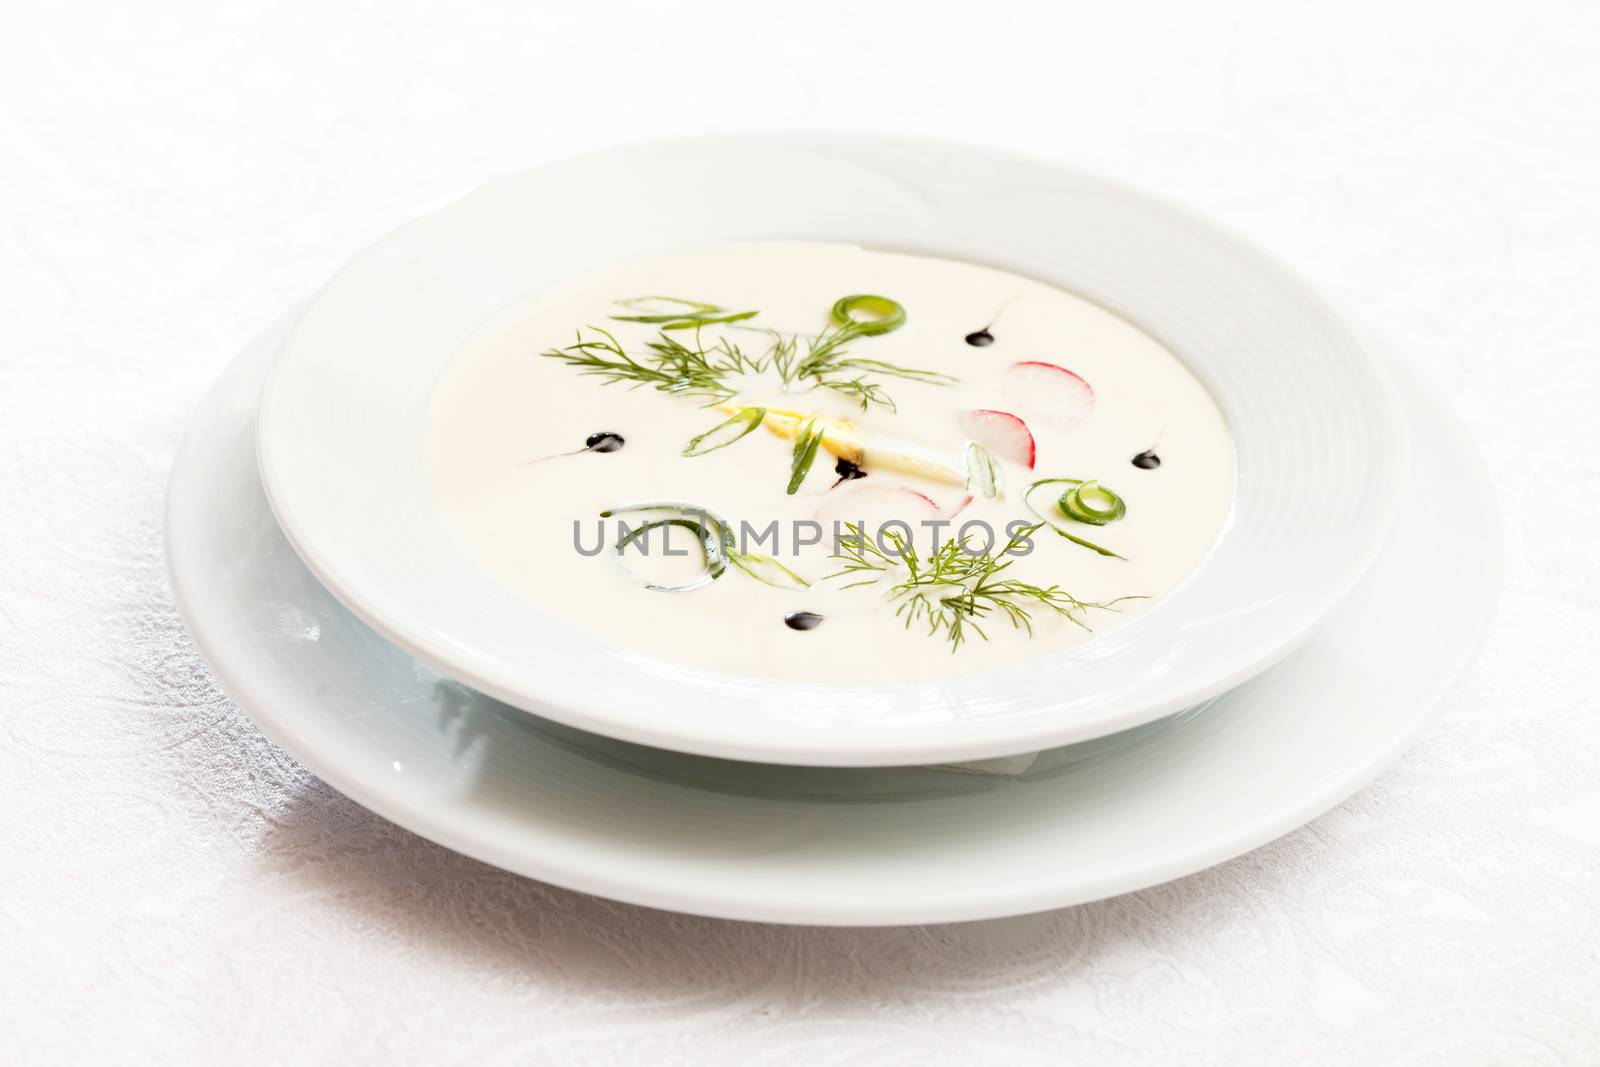 cold soup with cucumber by shebeko